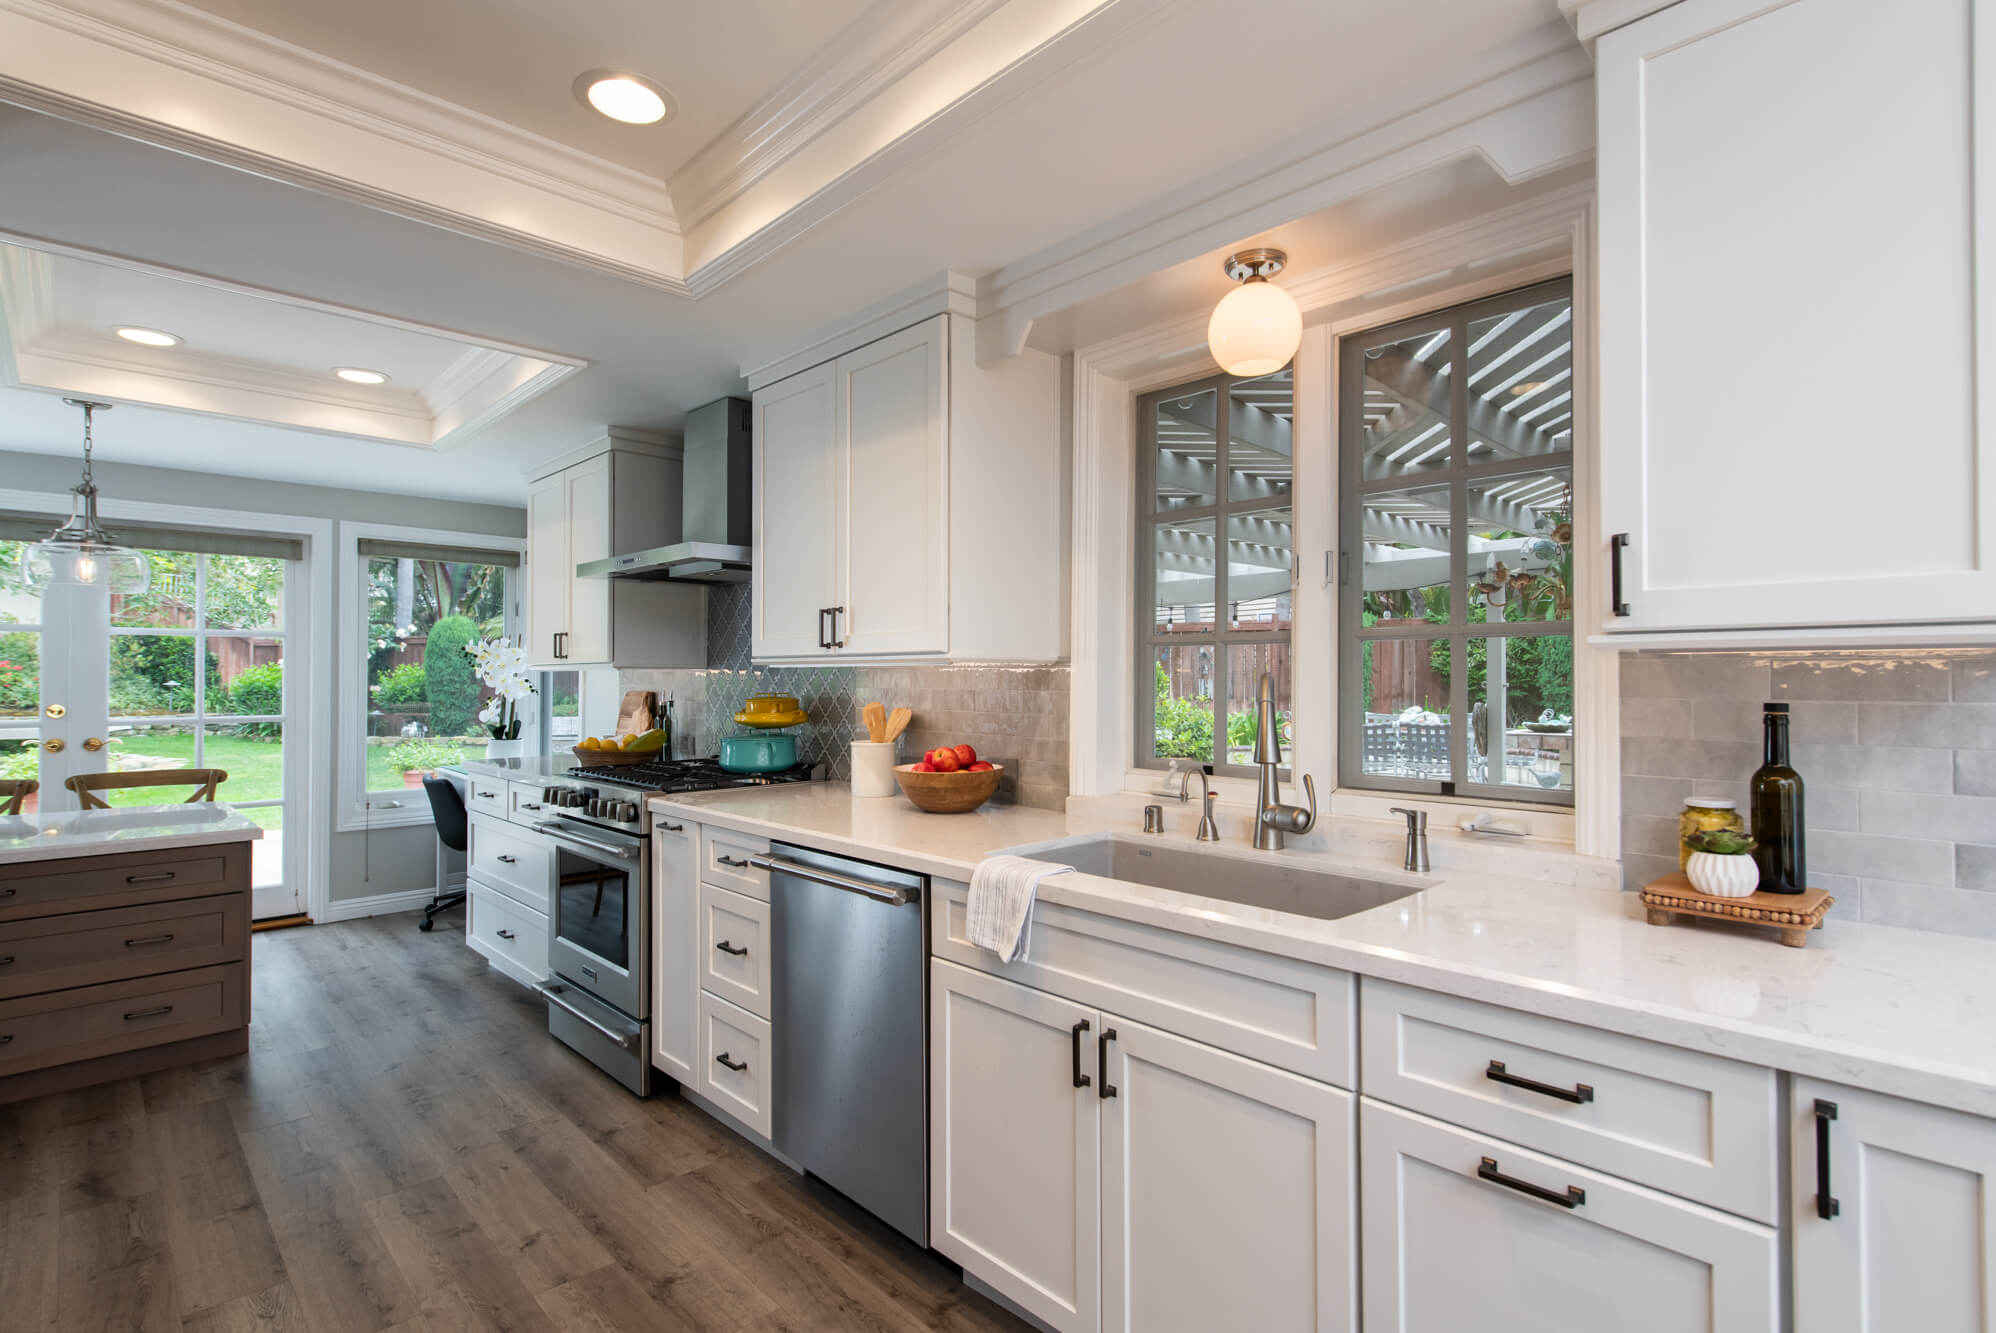 Should you hire a kitchen remodeling contractor